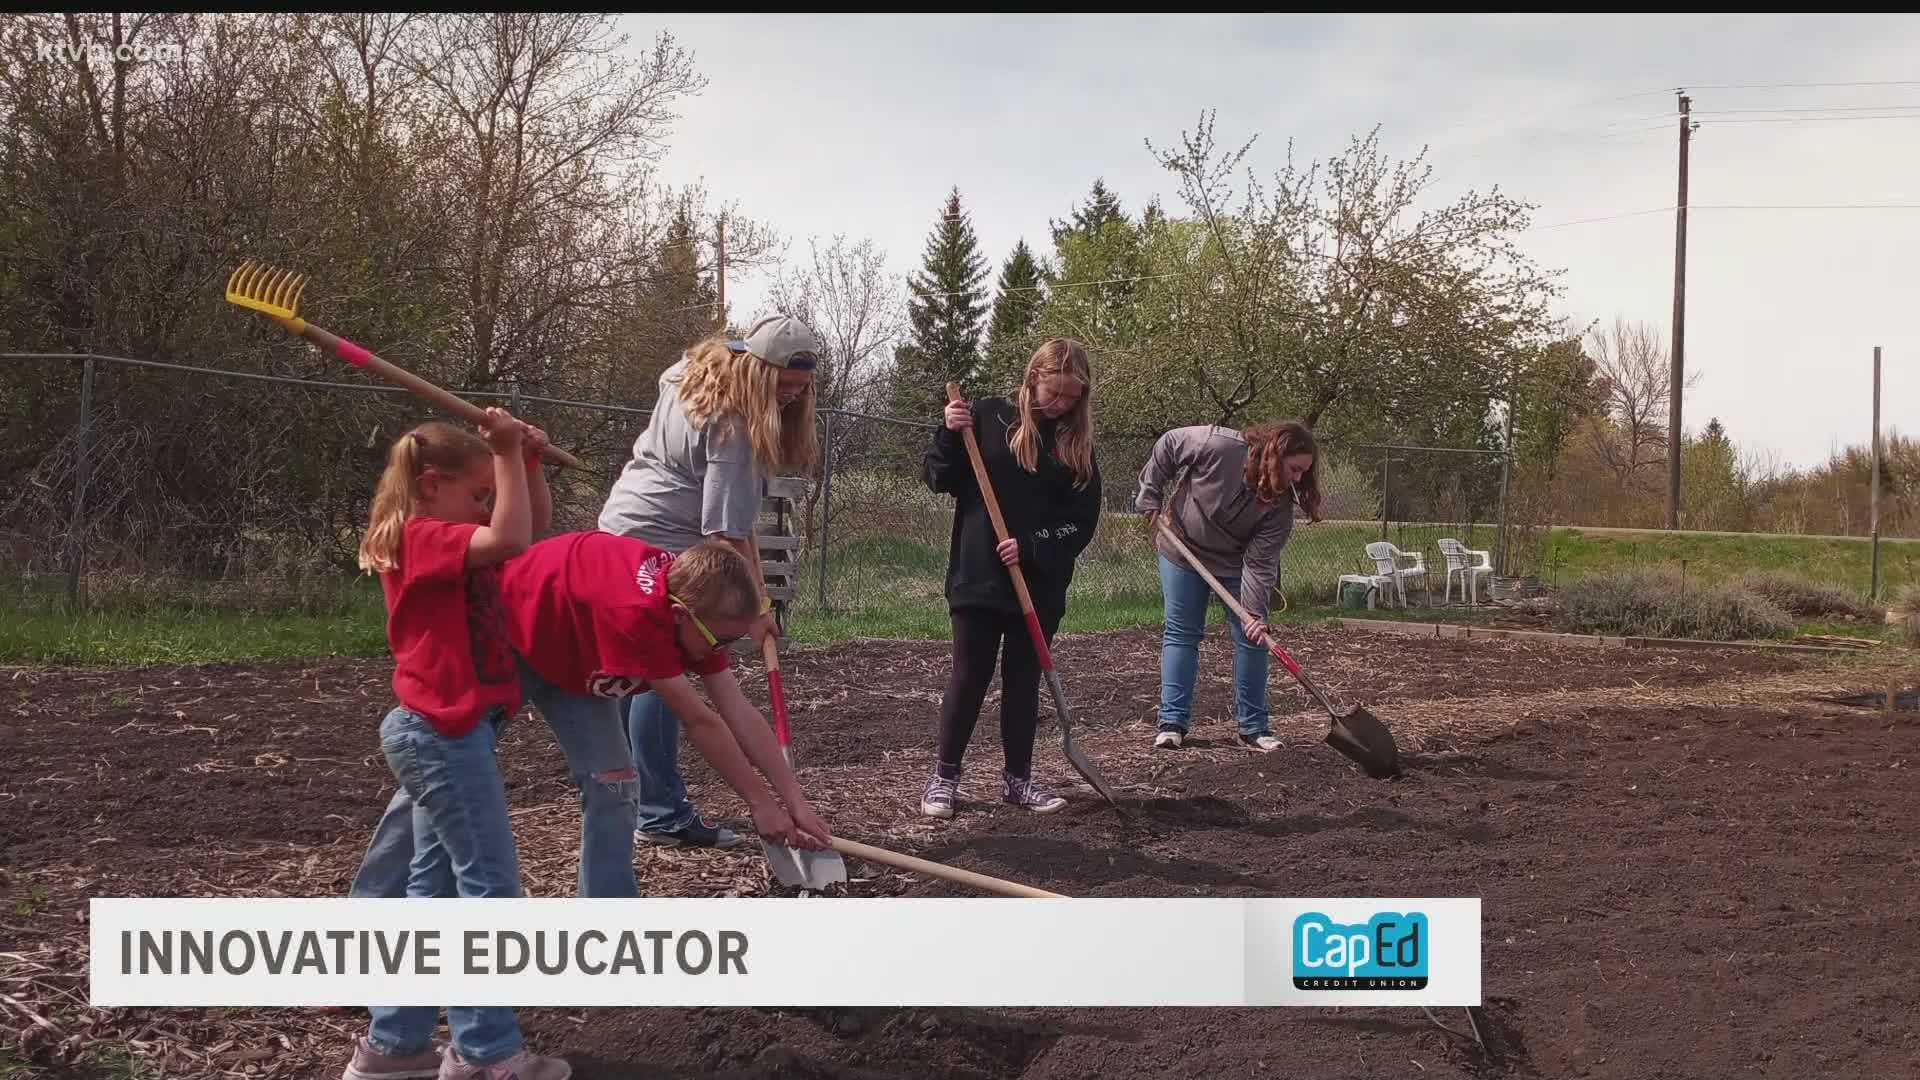 Gardening is giving Council Elementary School students a growing sense of accomplishment.